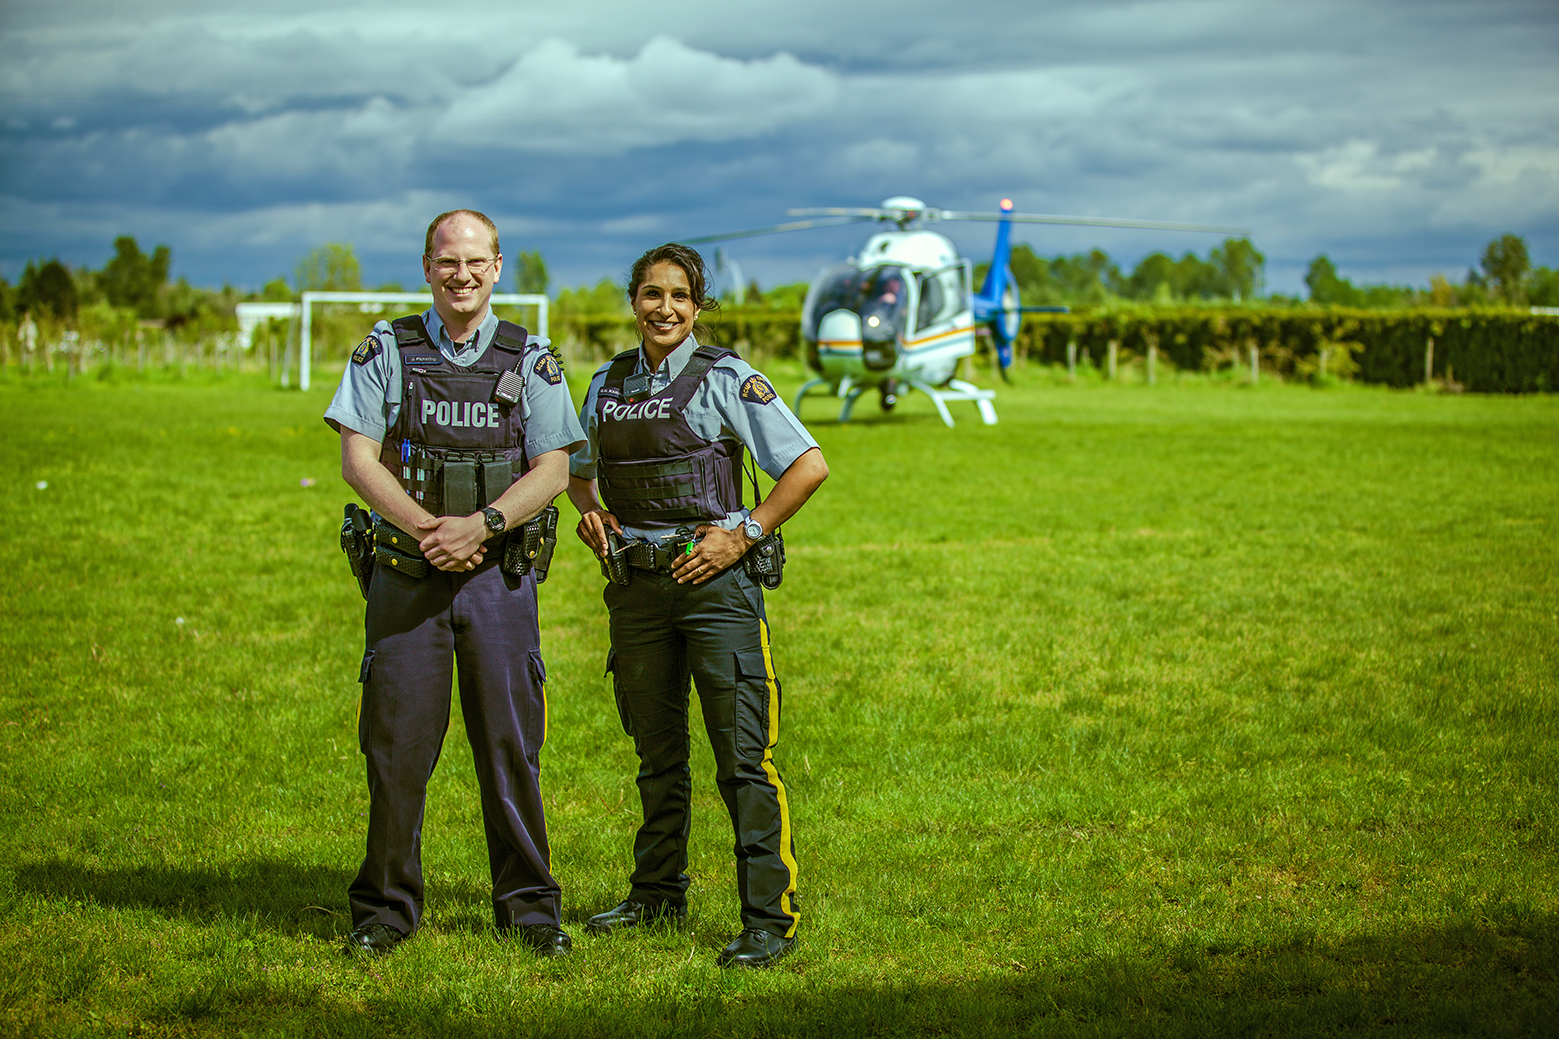 Image of two Edmonton Police Officers in the foreground smiling. There is a helicopter landed and out of focus in the background